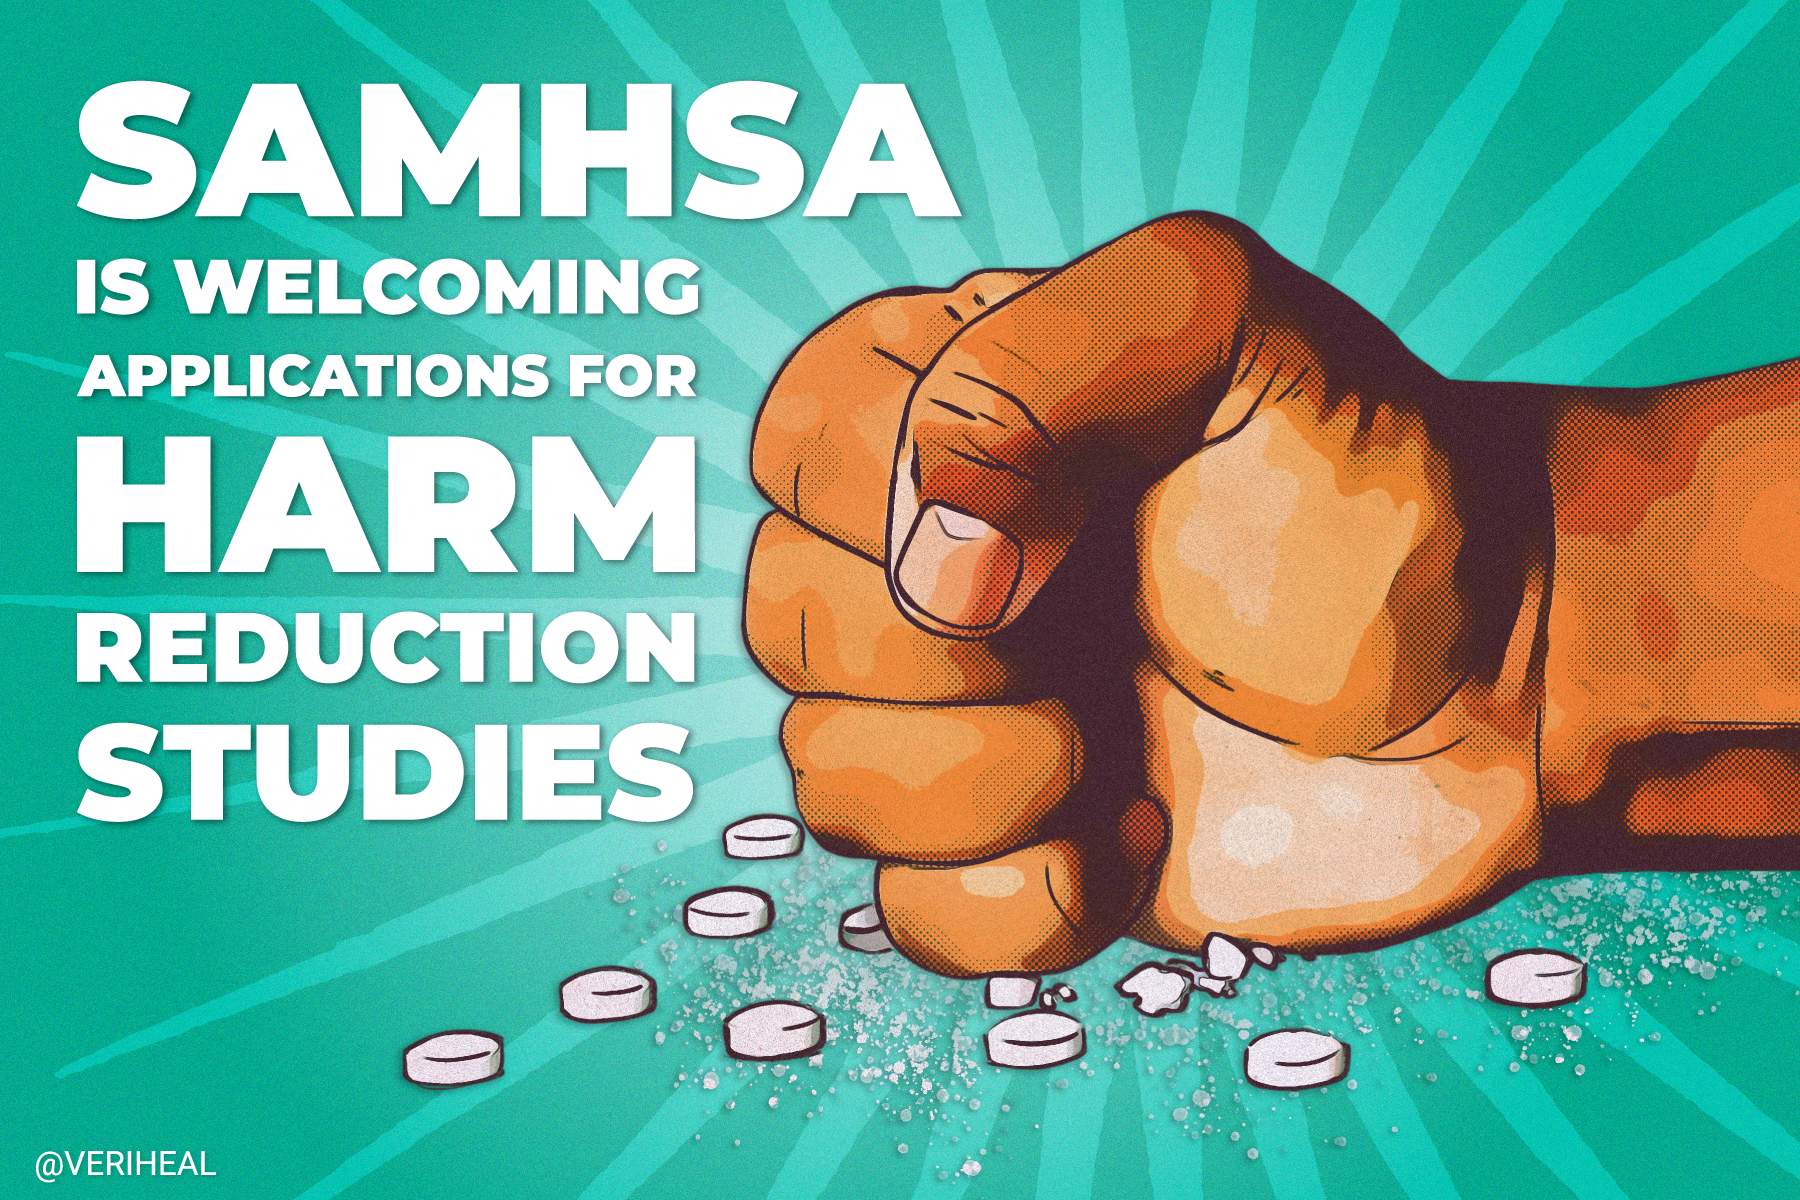 SAMHSA Is Welcoming Applications for Harm Reduction Studies